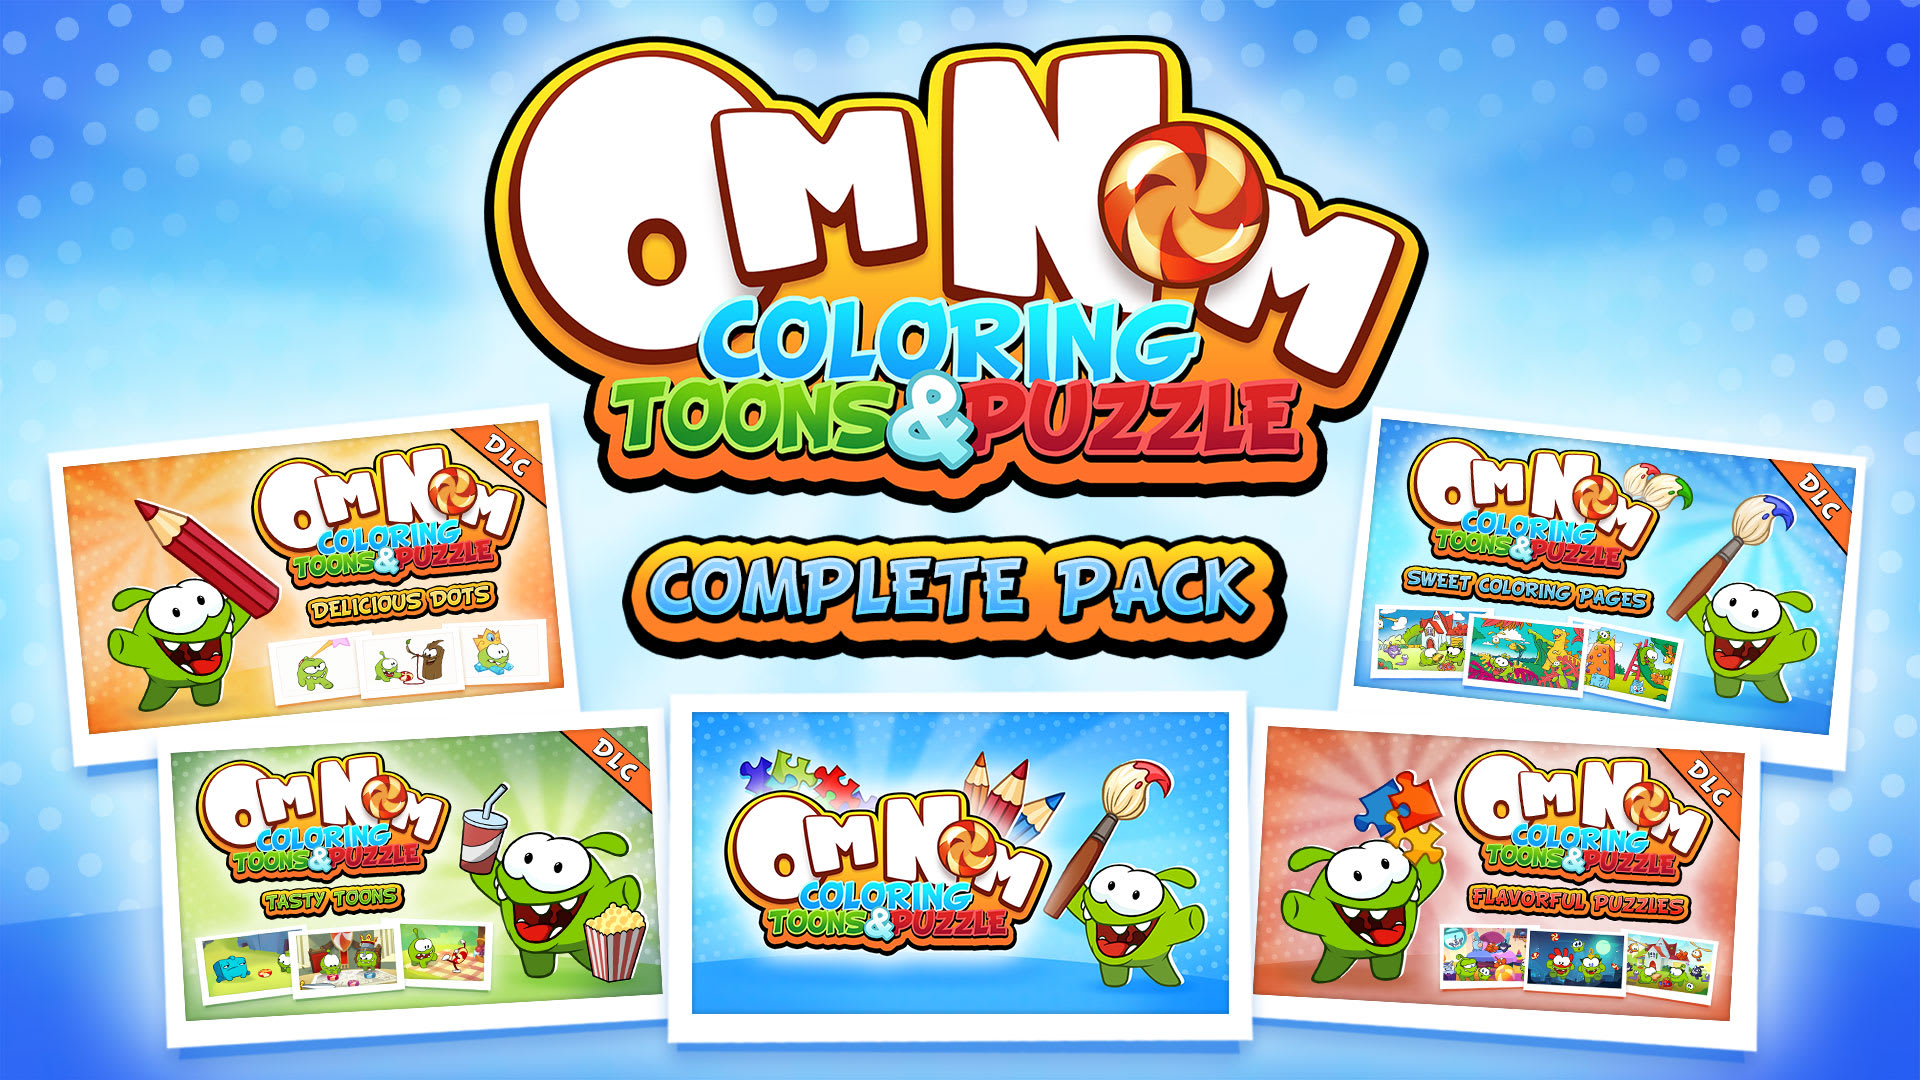 Om Nom: Coloring, Toons & Puzzle - Complete Pack 1